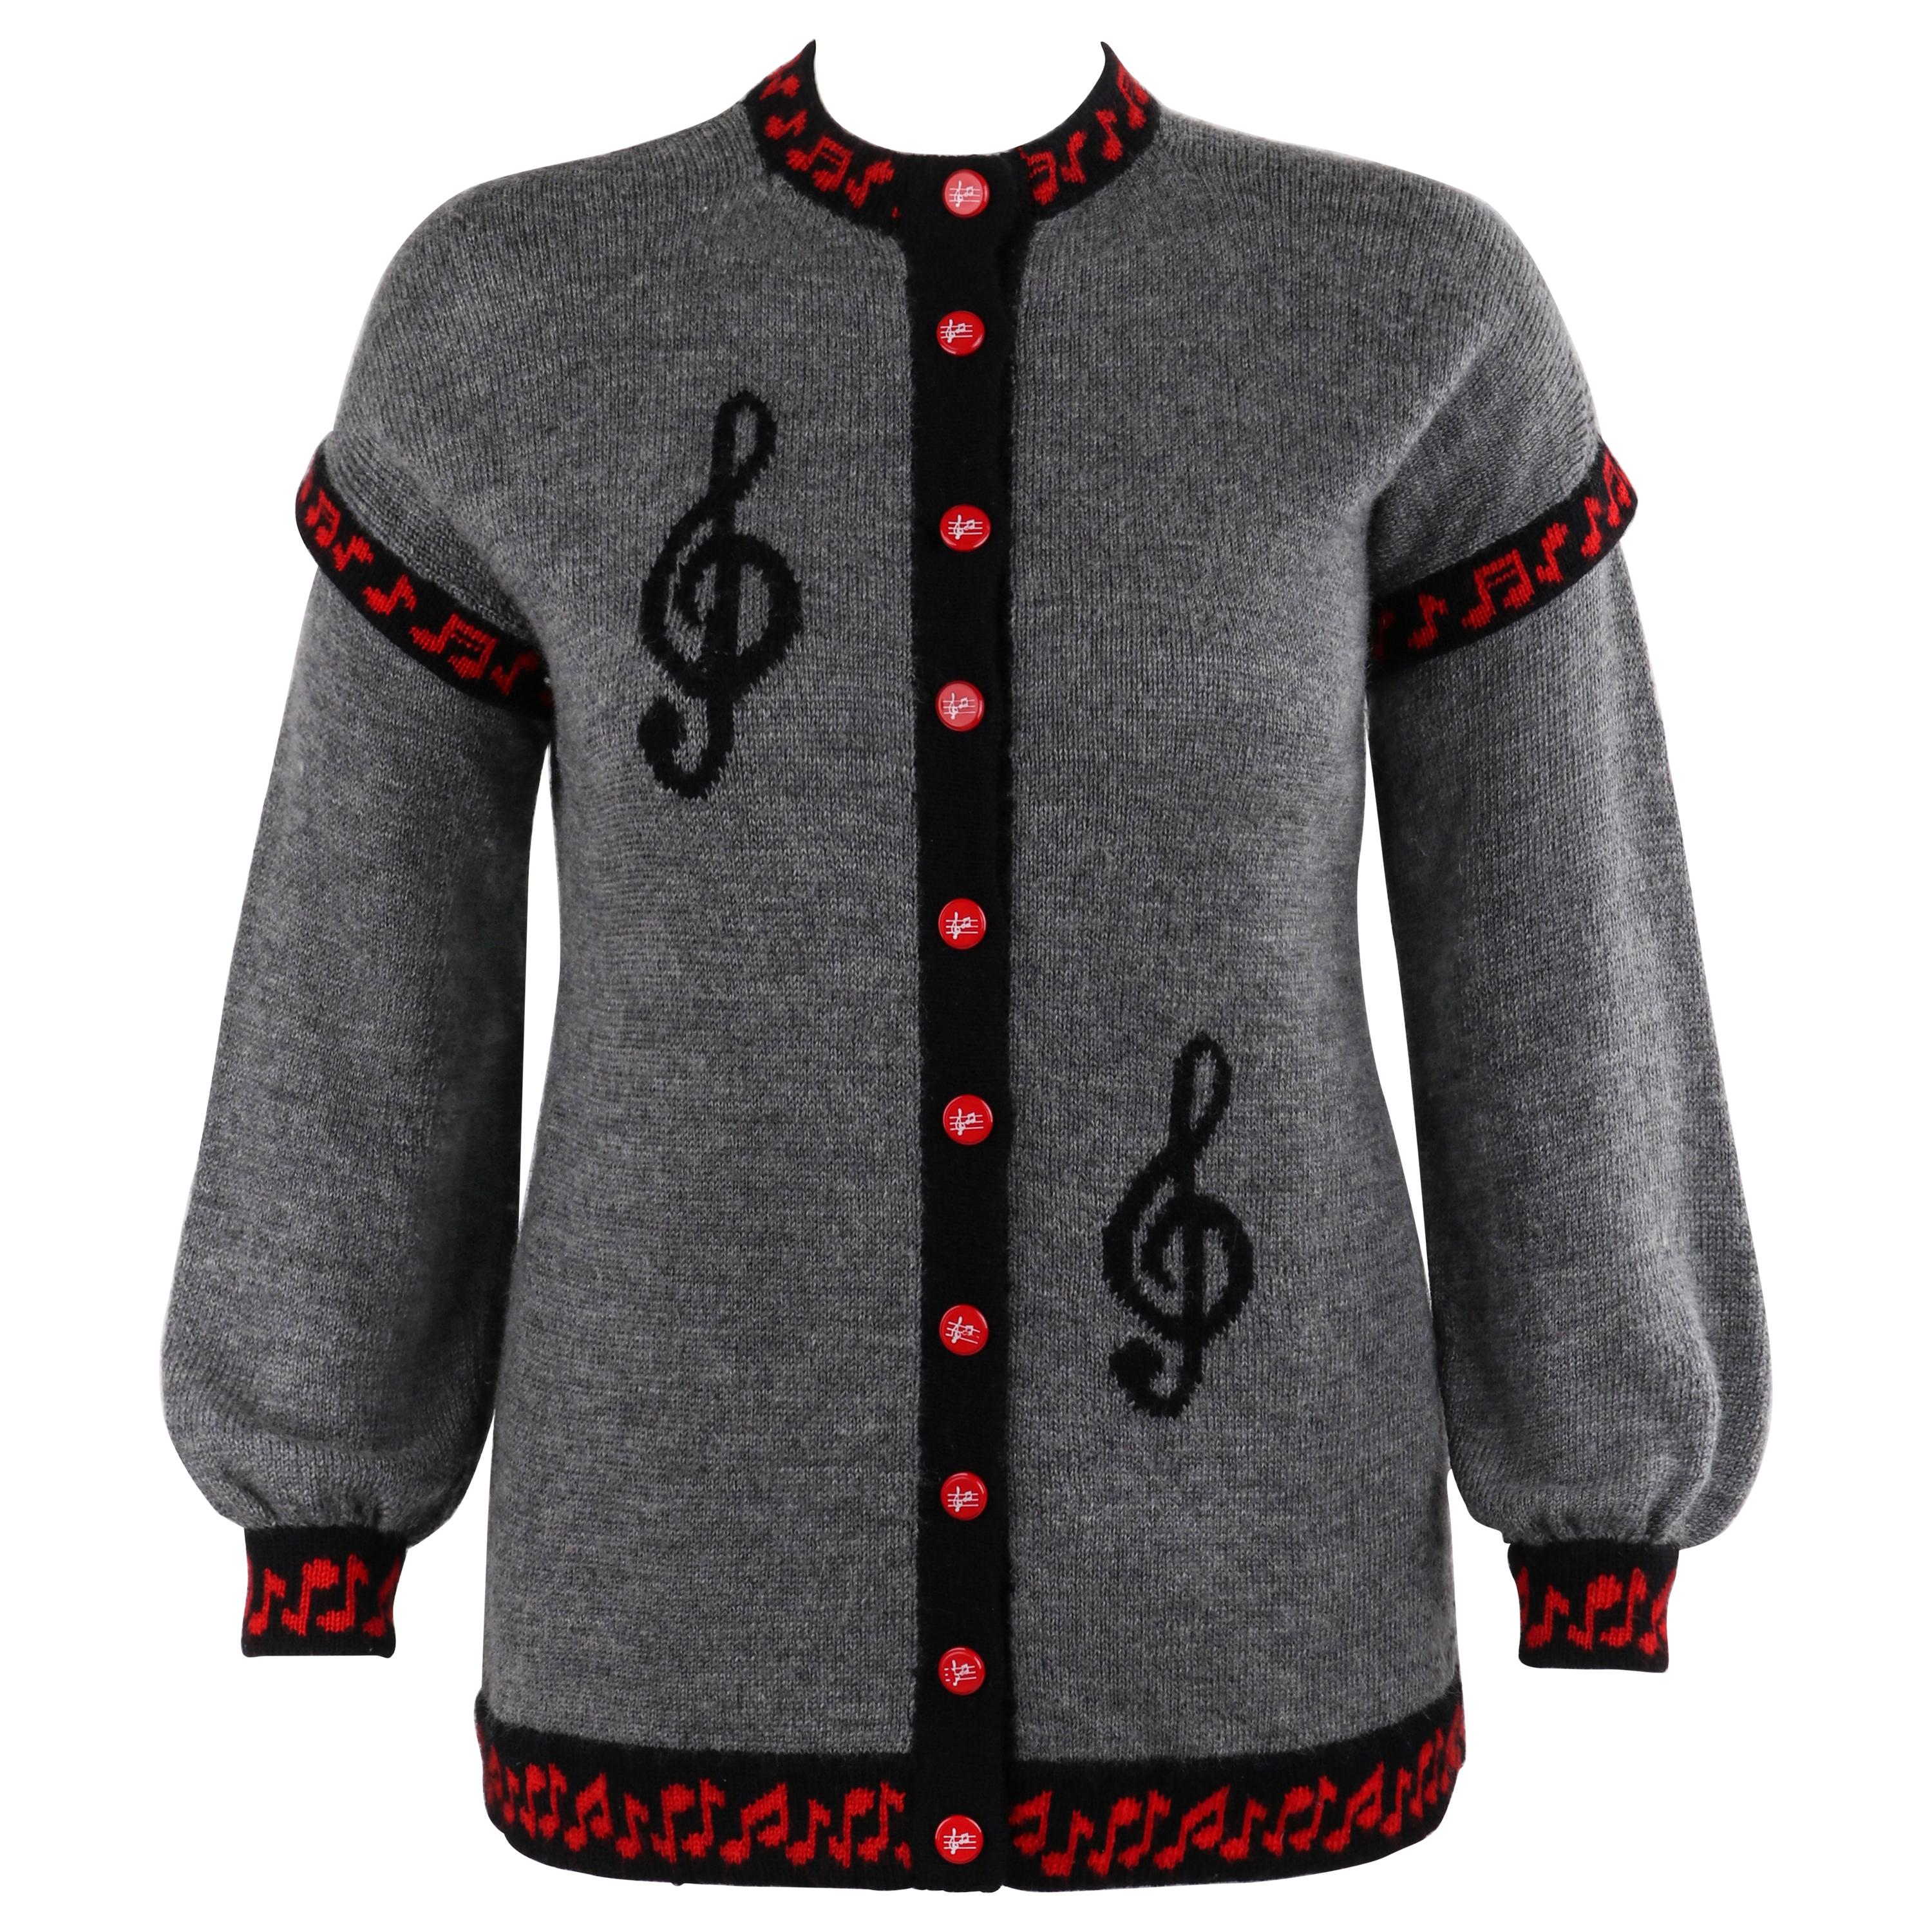 SALLY’S OWN c.1980’s Gray Black Music Note Knit Red Button Up Cardigan Sweater